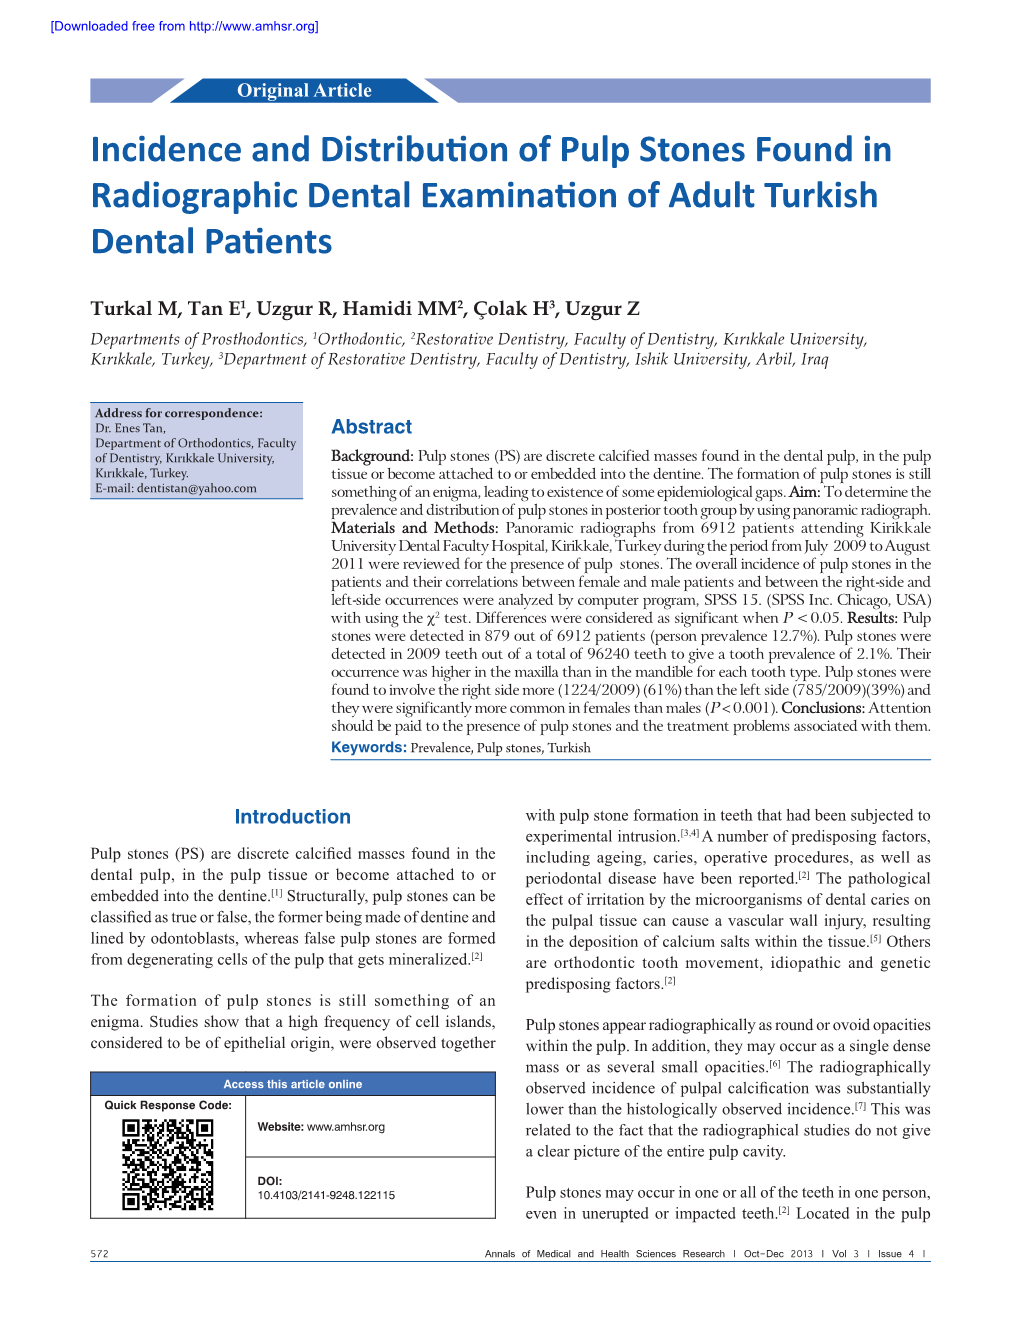 Incidence and Distribution of Pulp Stones Found in Radiographic Dental Examination of Adult Turkish Dental Patients